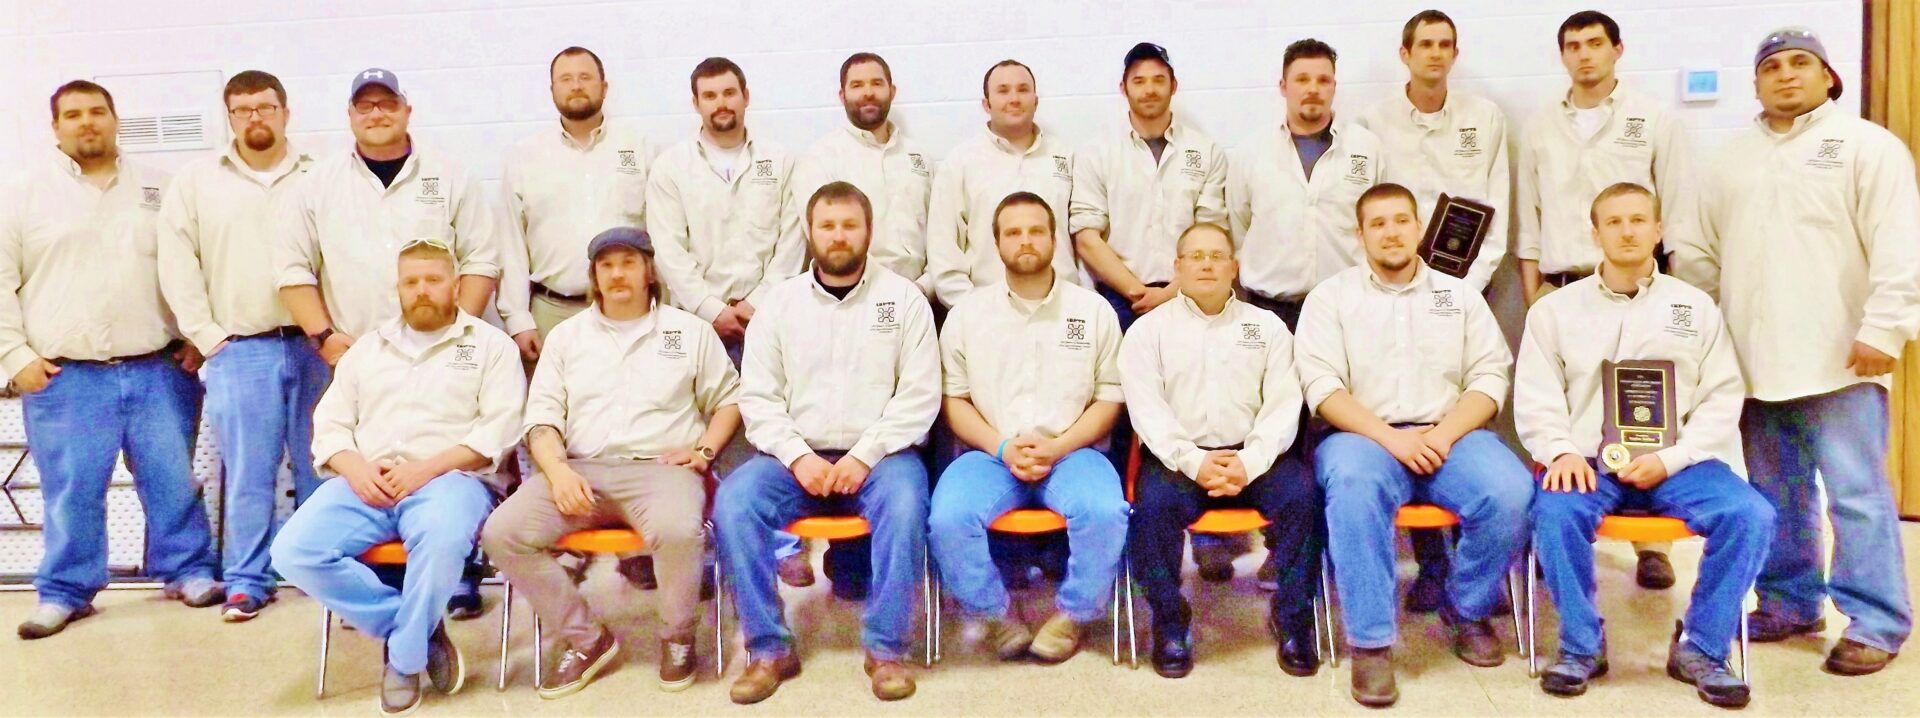 Indiana State Pipe Trades Association